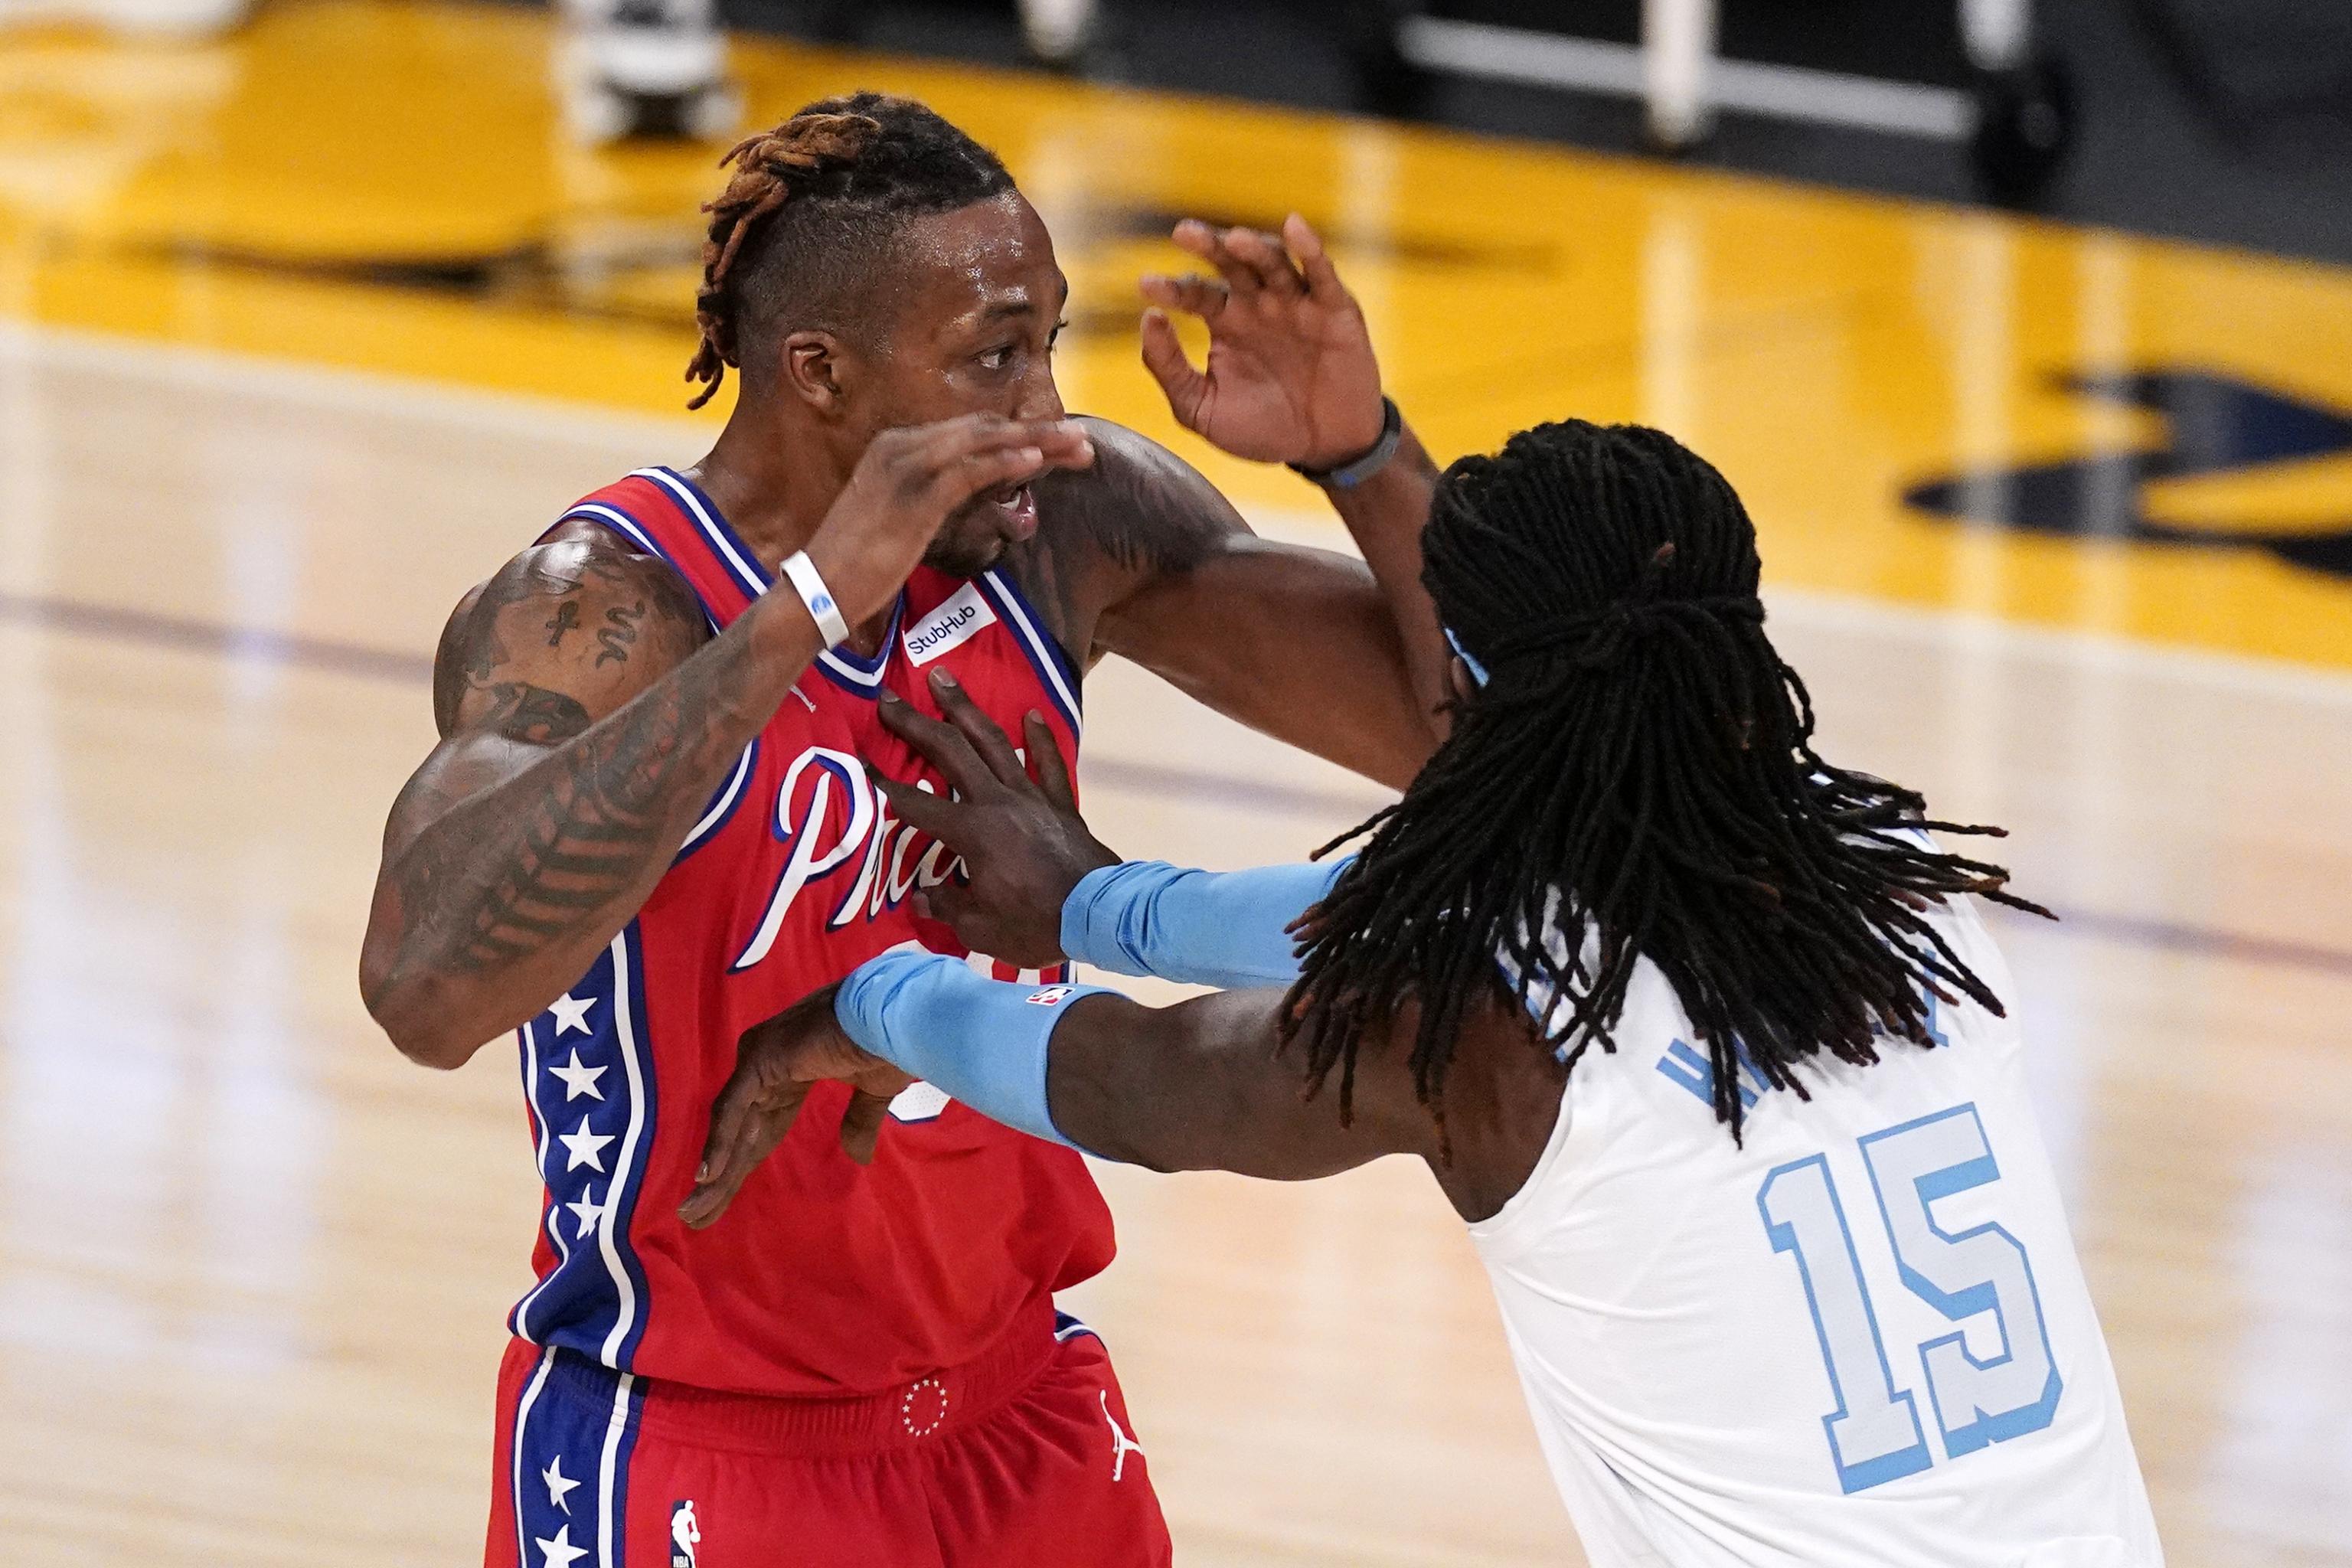 Lakers News: Montrezl Harrell Unsure Of Reason Behind Ejected Vs